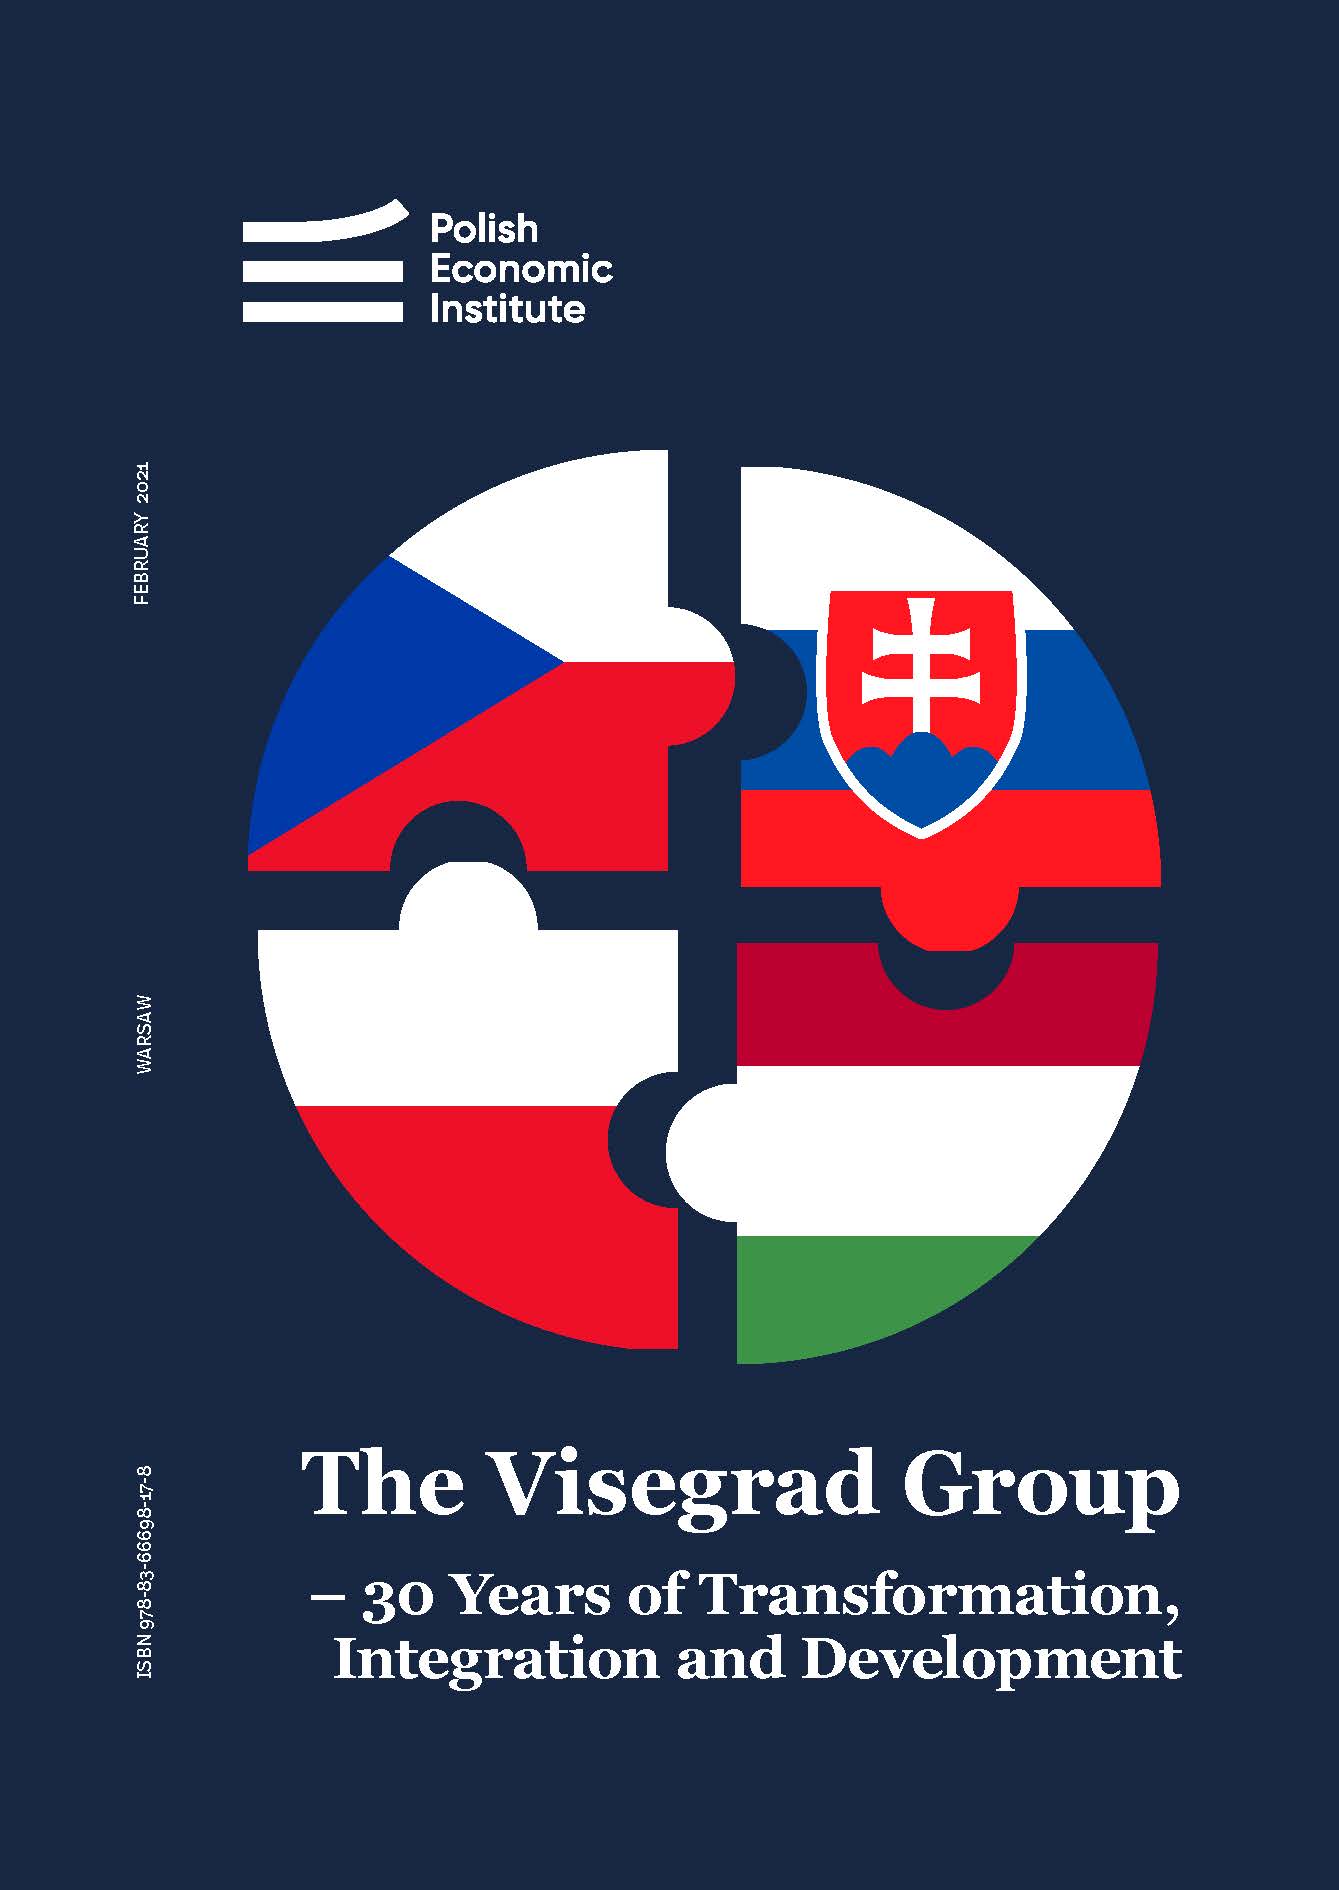 Over 30 years, the Visegrad Group exports have increased by a factor of 19